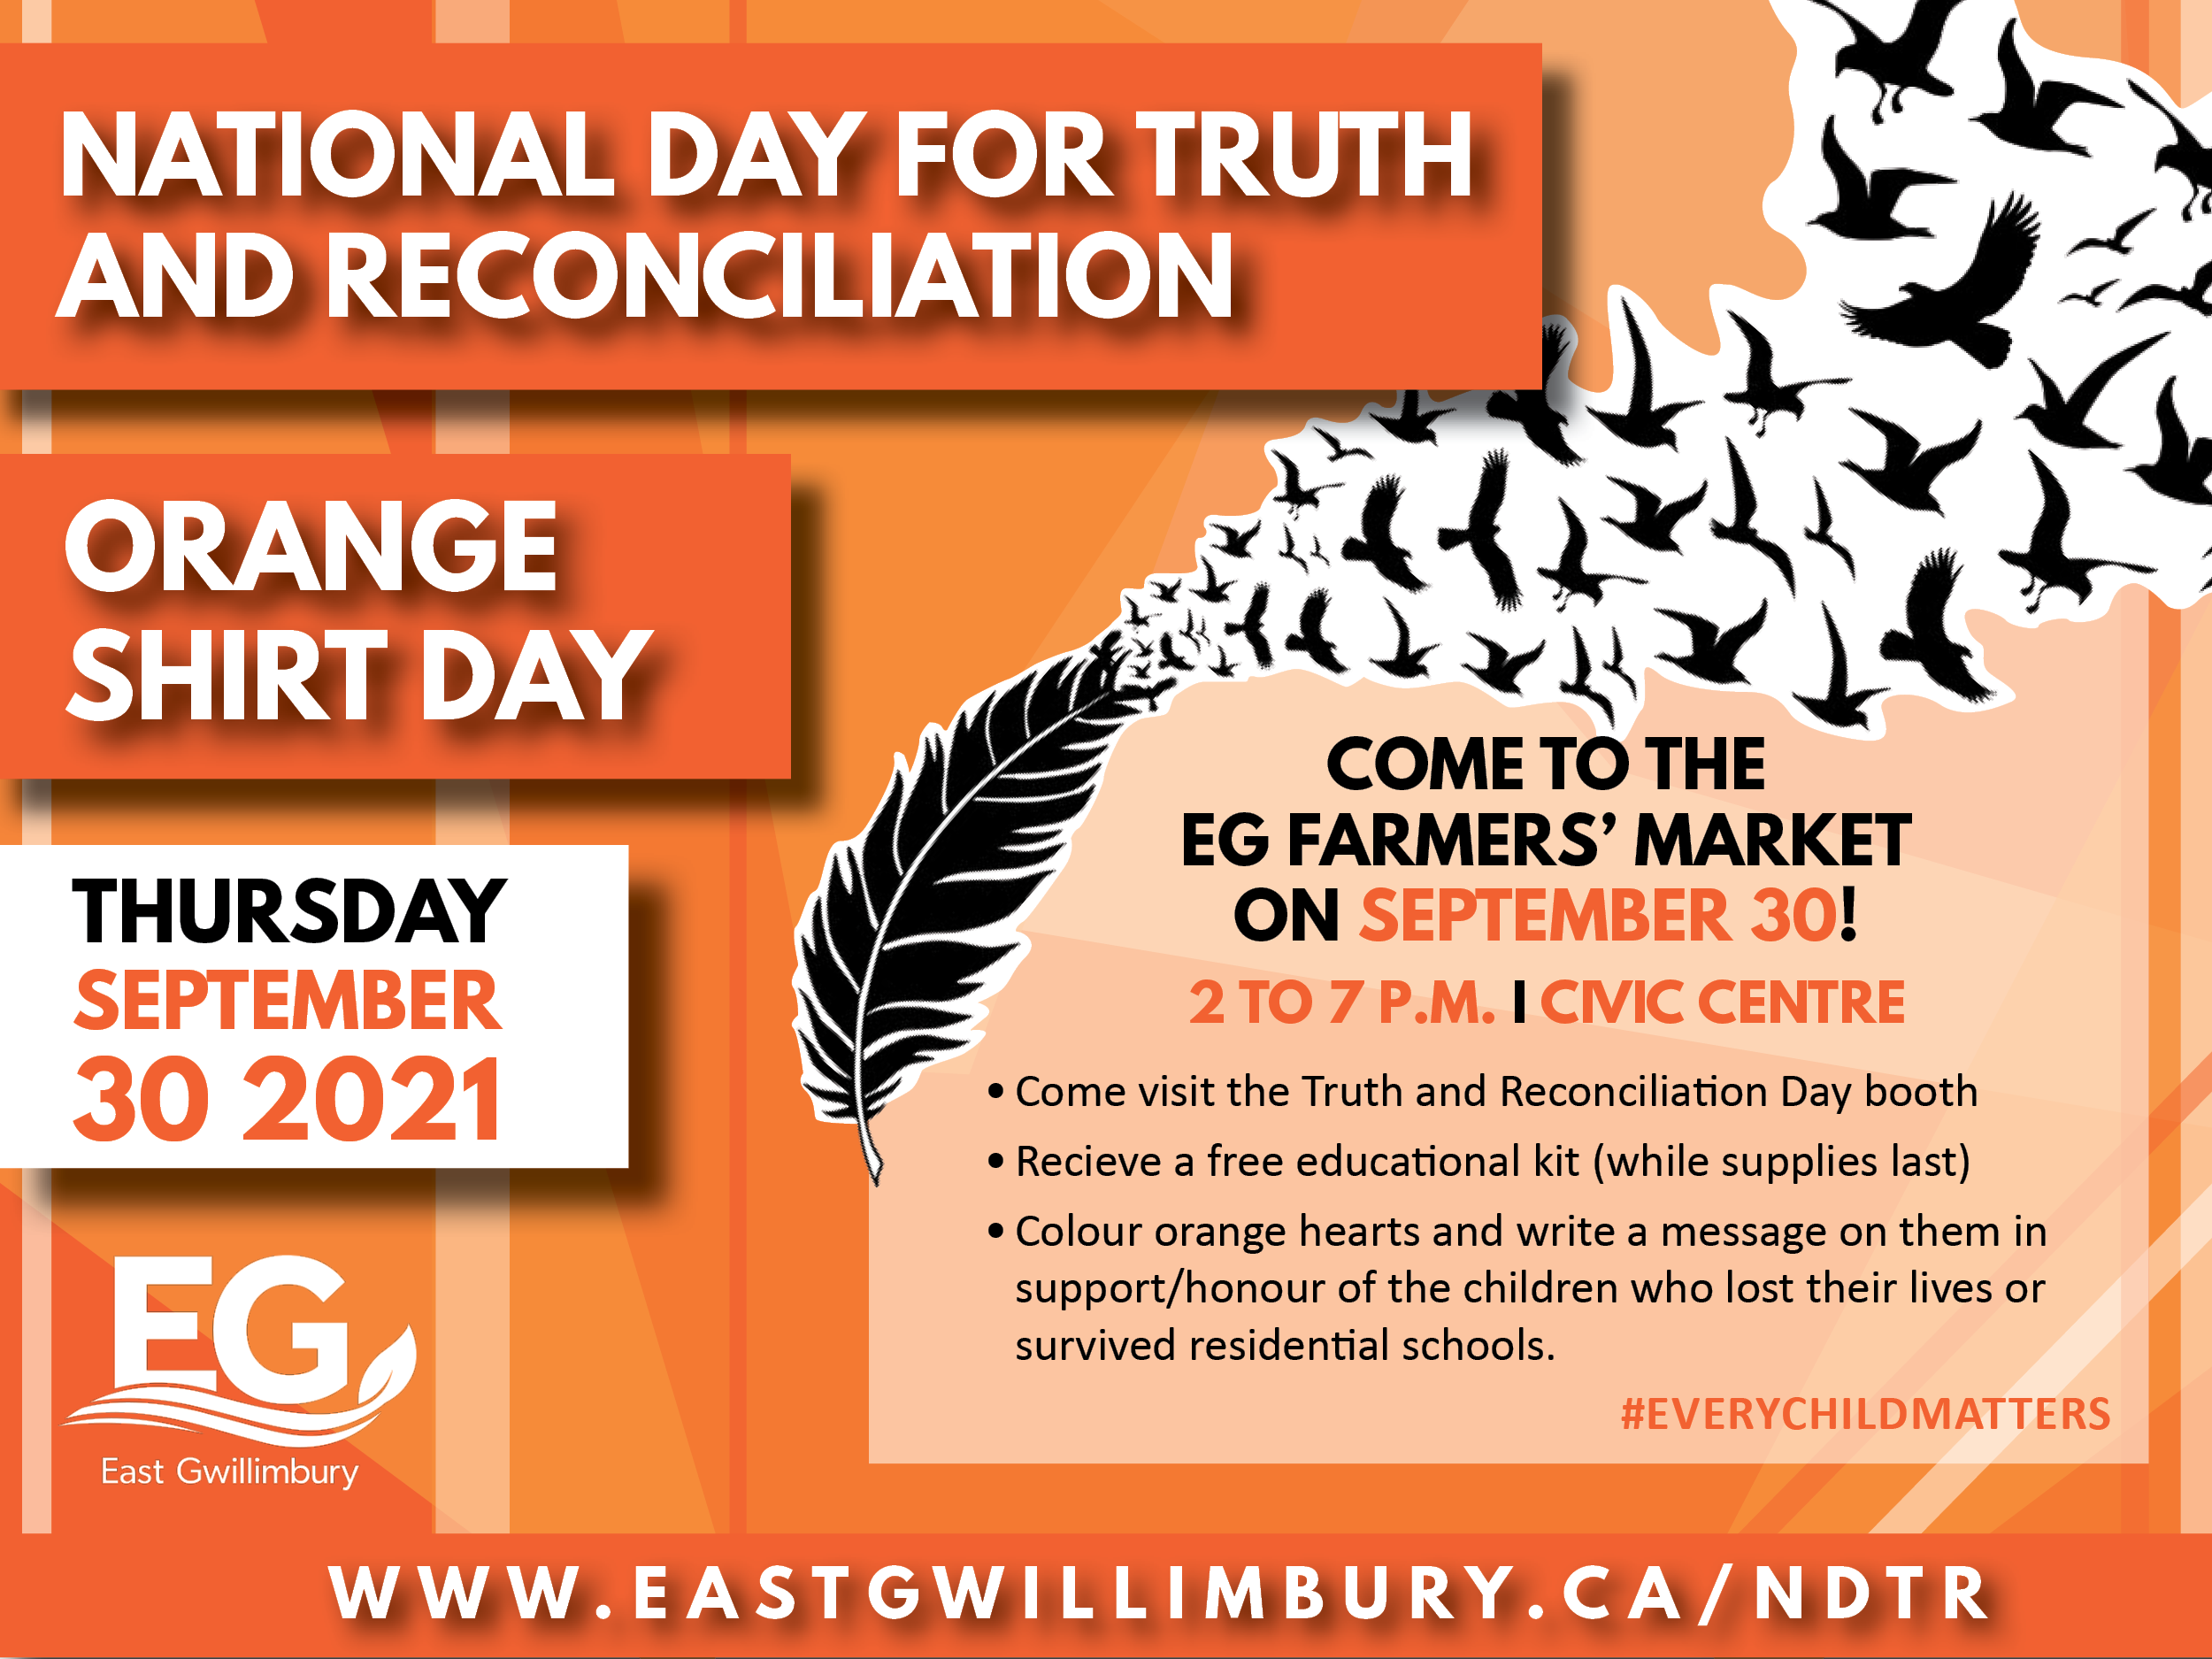 National Day for Truth and Reconciliation - come to the EG farmers' market